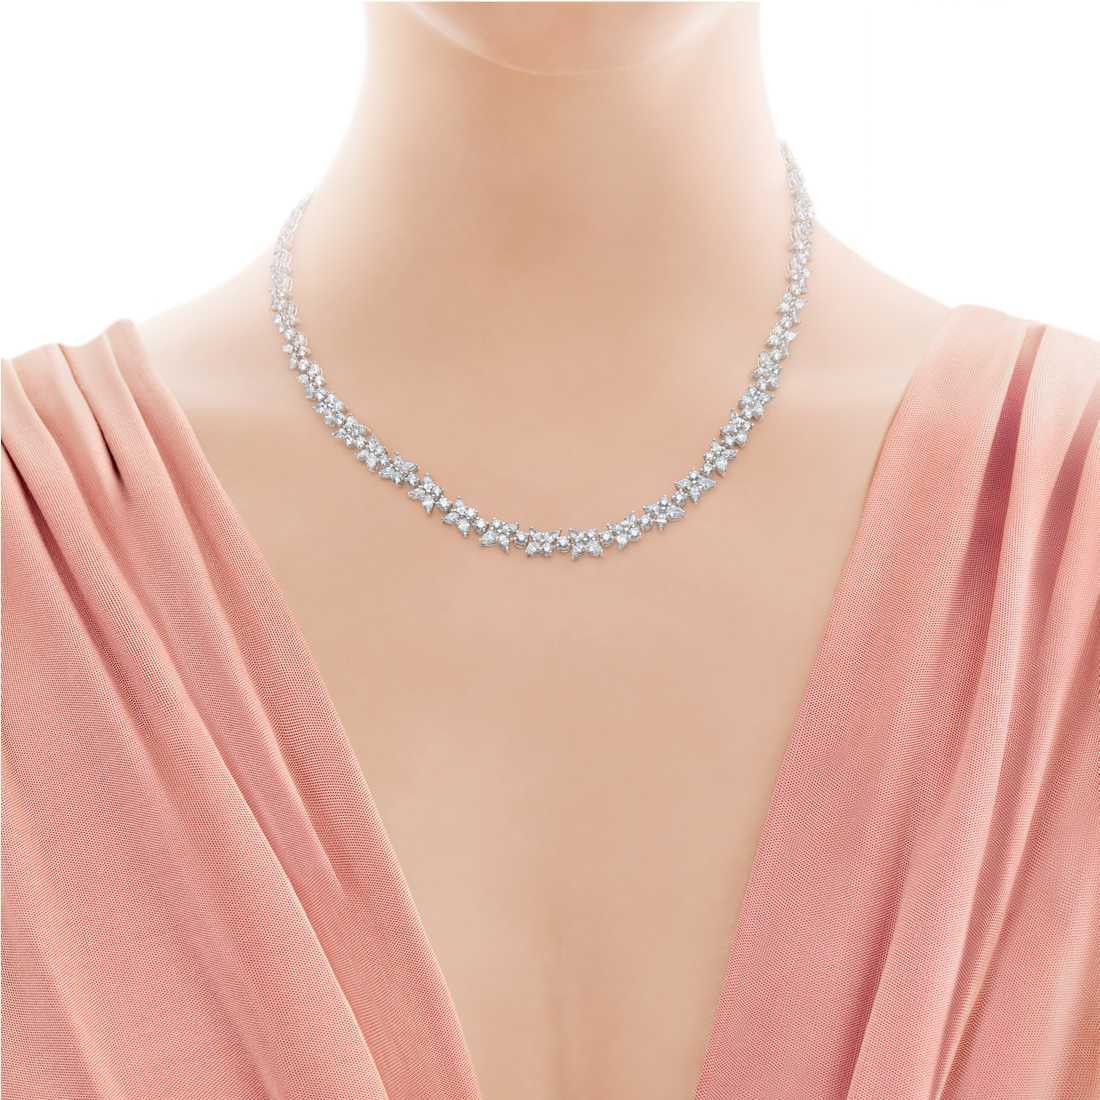 tiffany-victoriamixed-cluster-necklace-35092927_950473_sv_1.jpg